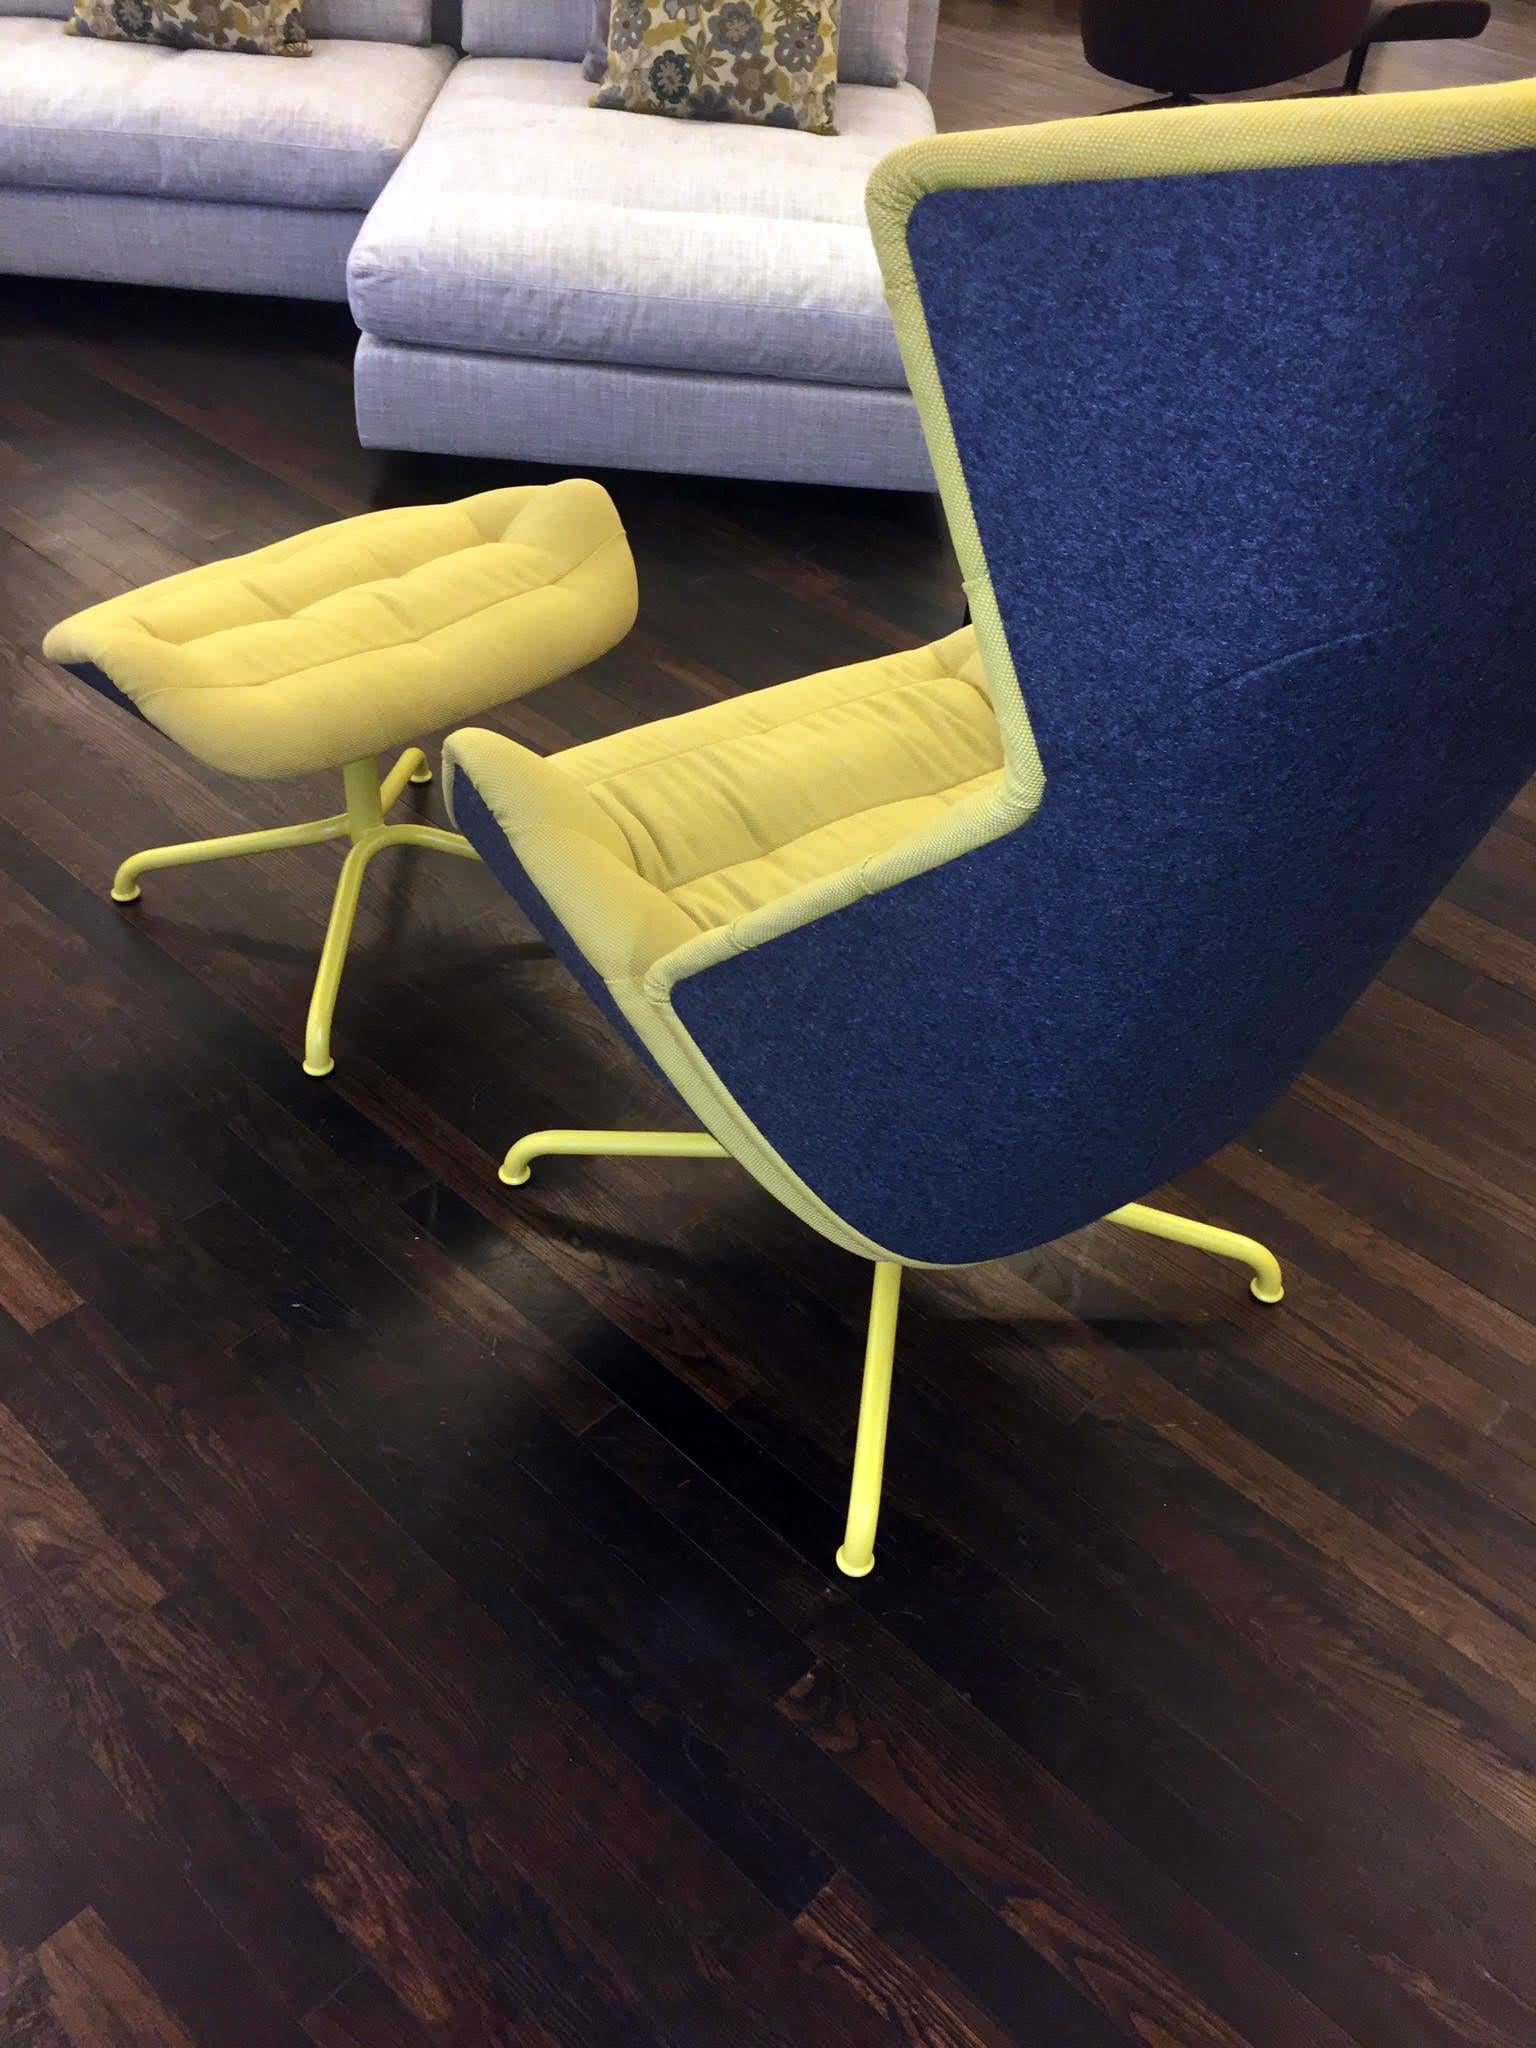 Frame: Steel tube lacquered TS 2050 mustard
Inner cushion: Novum pear
Outer Shell: Formfleece
Gliders: Plastic
808 H ottoman
Original Price:$7,750
Ottoman: W 63 cm H 40 cm D 45 cm
The lounge chair 808 plays with the contrast between